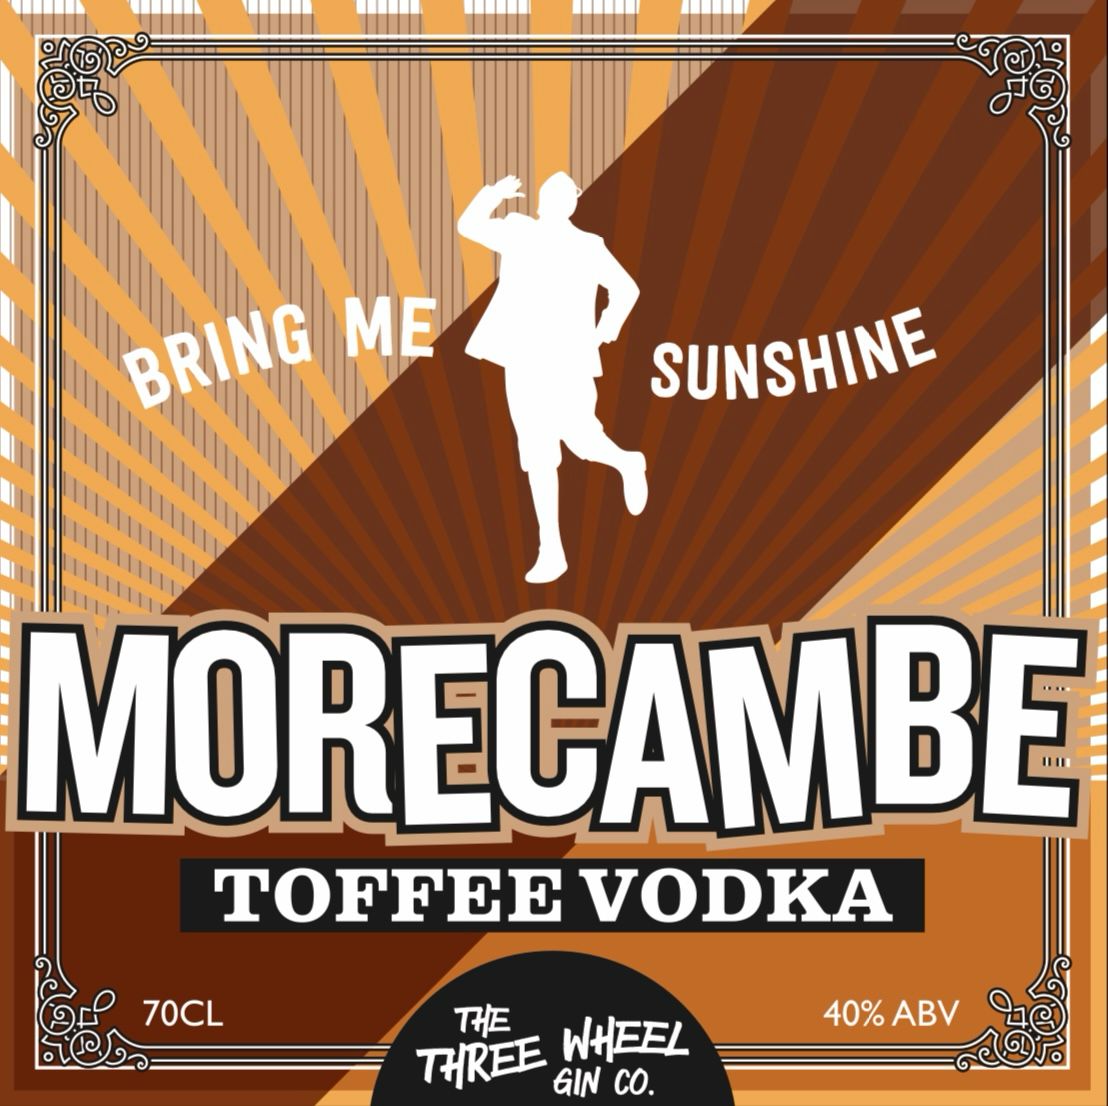 Three Wheel Gin Co Morecambe Toffee Vodka, 35cl & 70cl